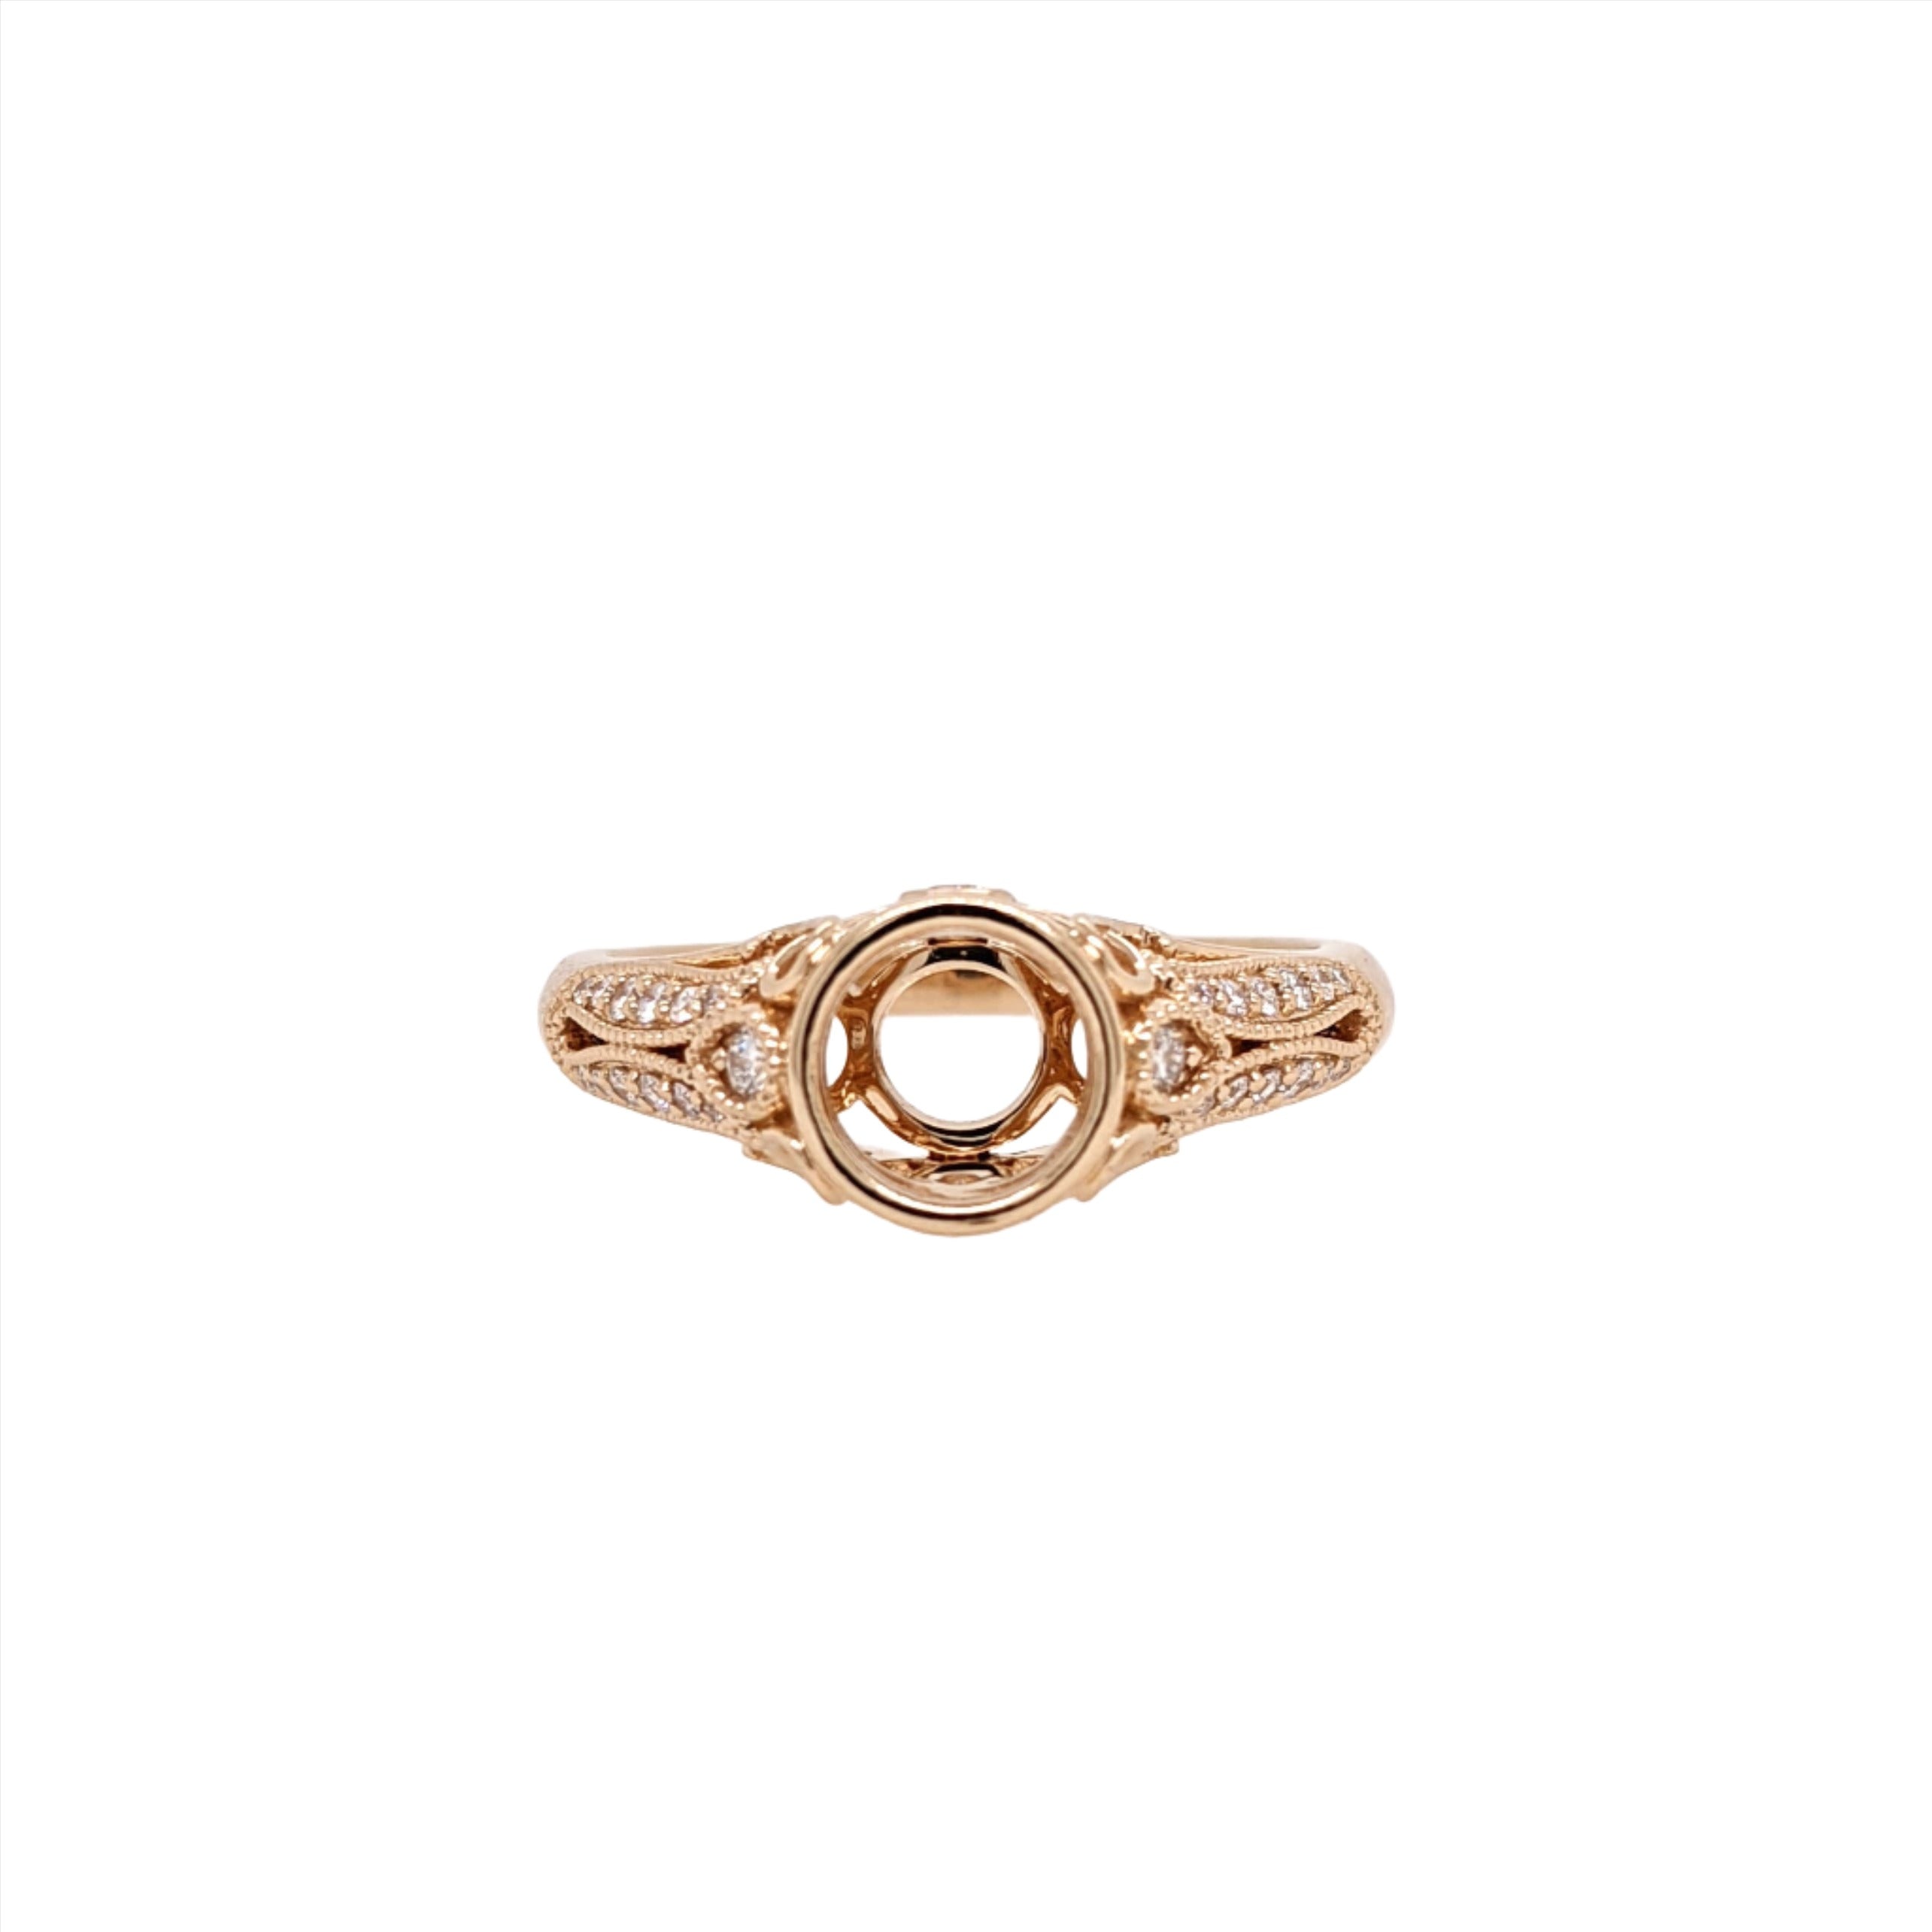 Detailed Vintage Style Ring Semi Mount in Solid 14k White, Yellow or Rose Gold w Round Diamond Accents | Round Bezel Setting | Custom Sizes